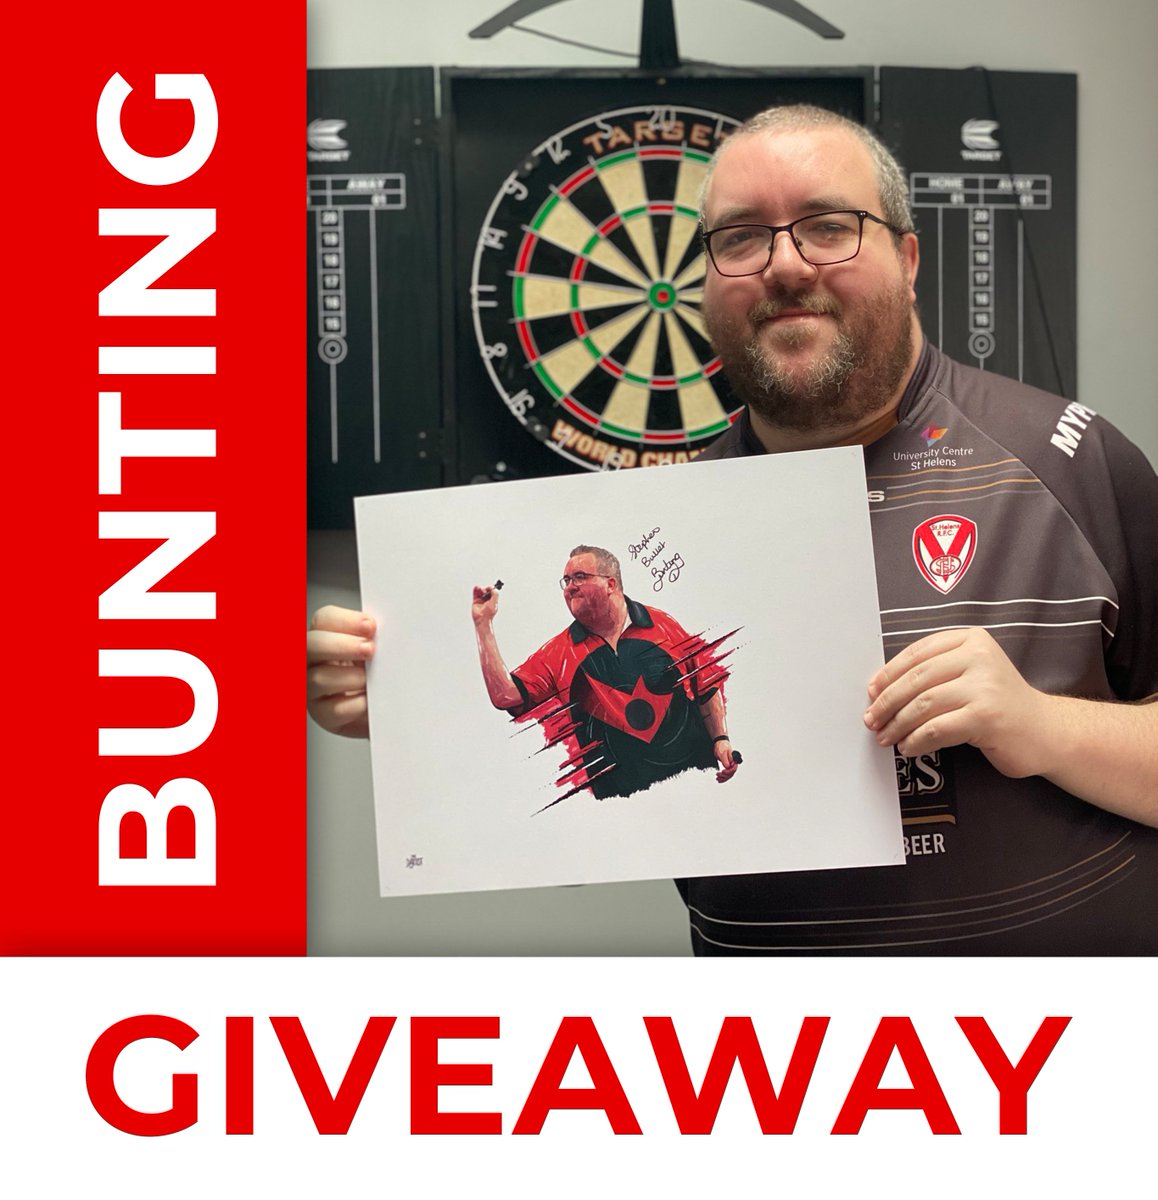 𝗦𝗧𝗘𝗣𝗛𝗘𝗡 𝗕𝗨𝗡𝗧𝗜𝗡𝗚 𝗚𝗜𝗩𝗘𝗔𝗪𝗔𝗬 🎨 For your chance to win a Hand Signed Stephen Bunting print from TheDartist.co.uk: • Follow @TheDartistArt & @sbunting180 • Retweet The winner will be announced on 2nd February. Good Luck! 🎯